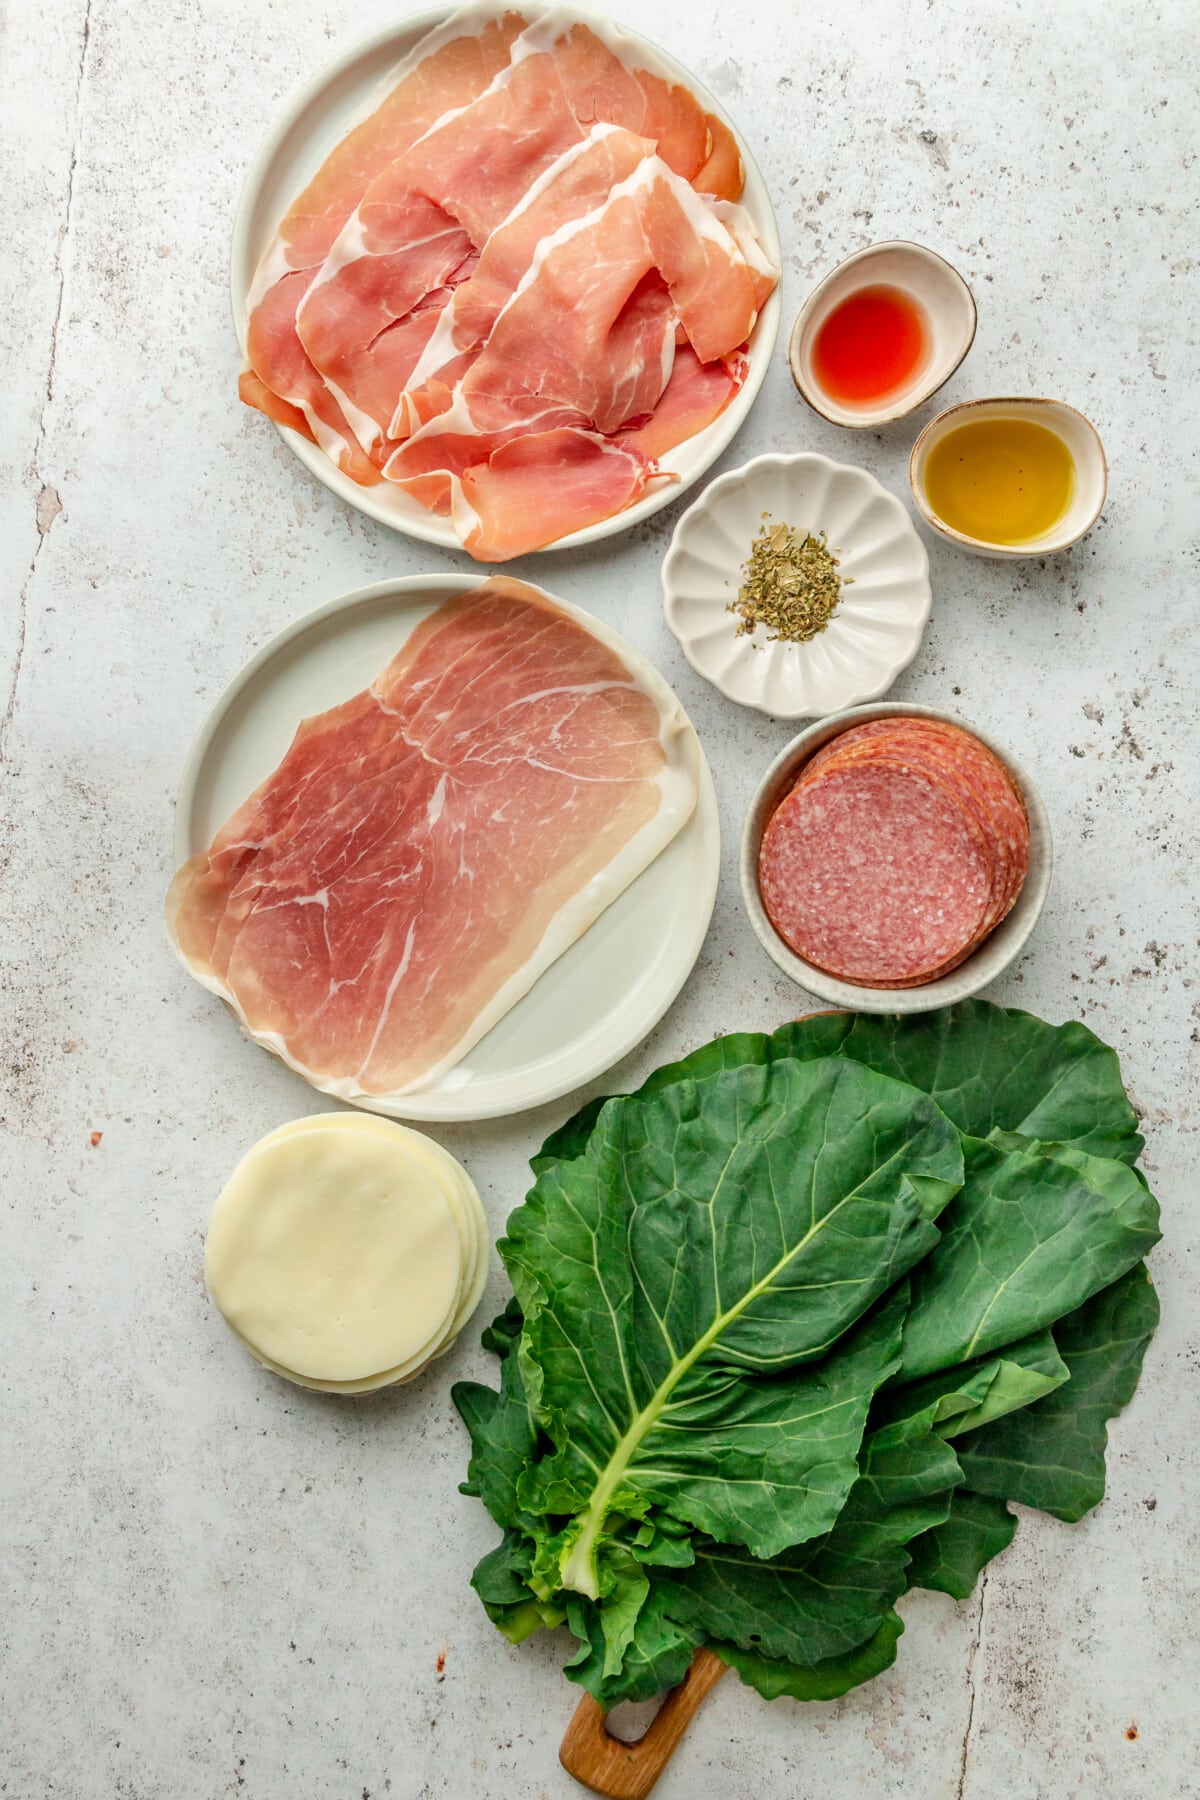 Ingredients for make ahead Italian collard wraps sit in a variety of plates and bowls on a light grey surface.